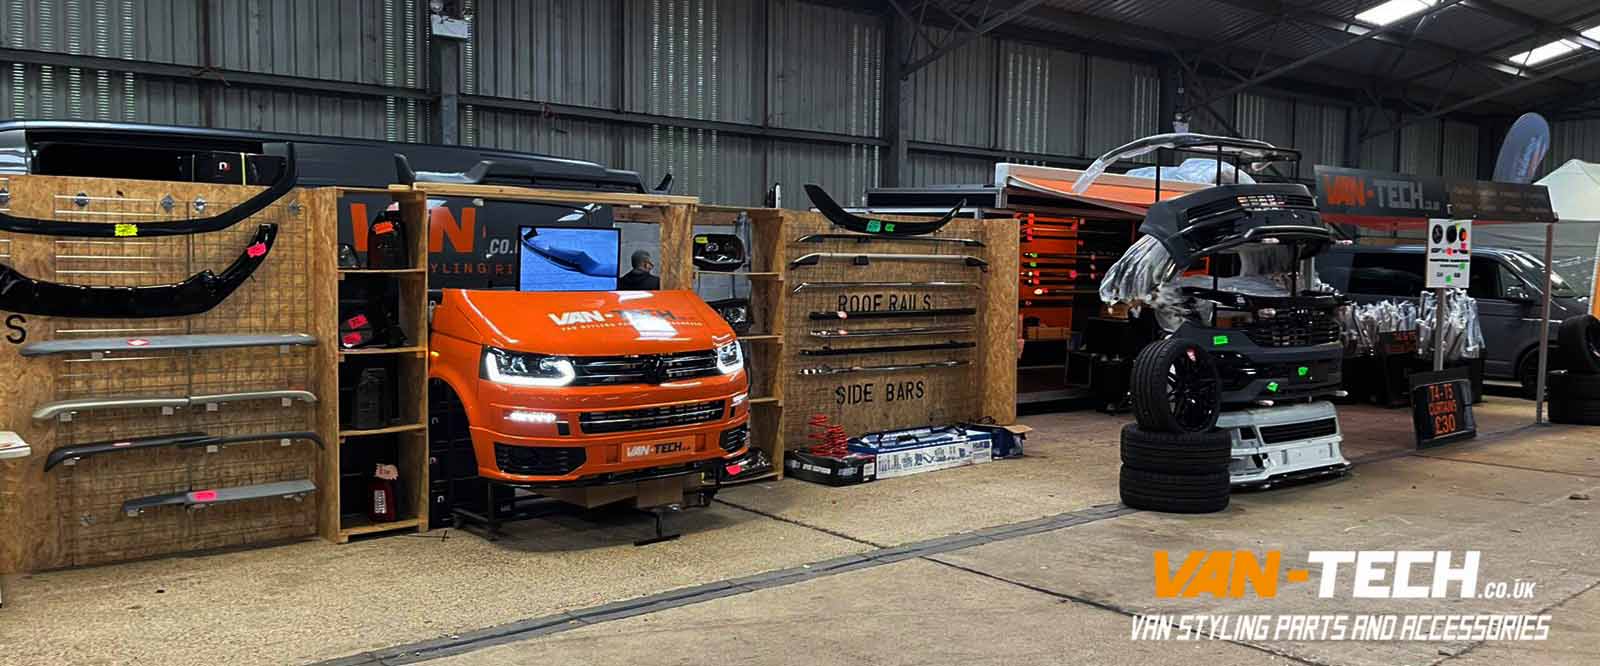 Van-Tech are setting up our Trade stand for a busy Weekend at Busfest